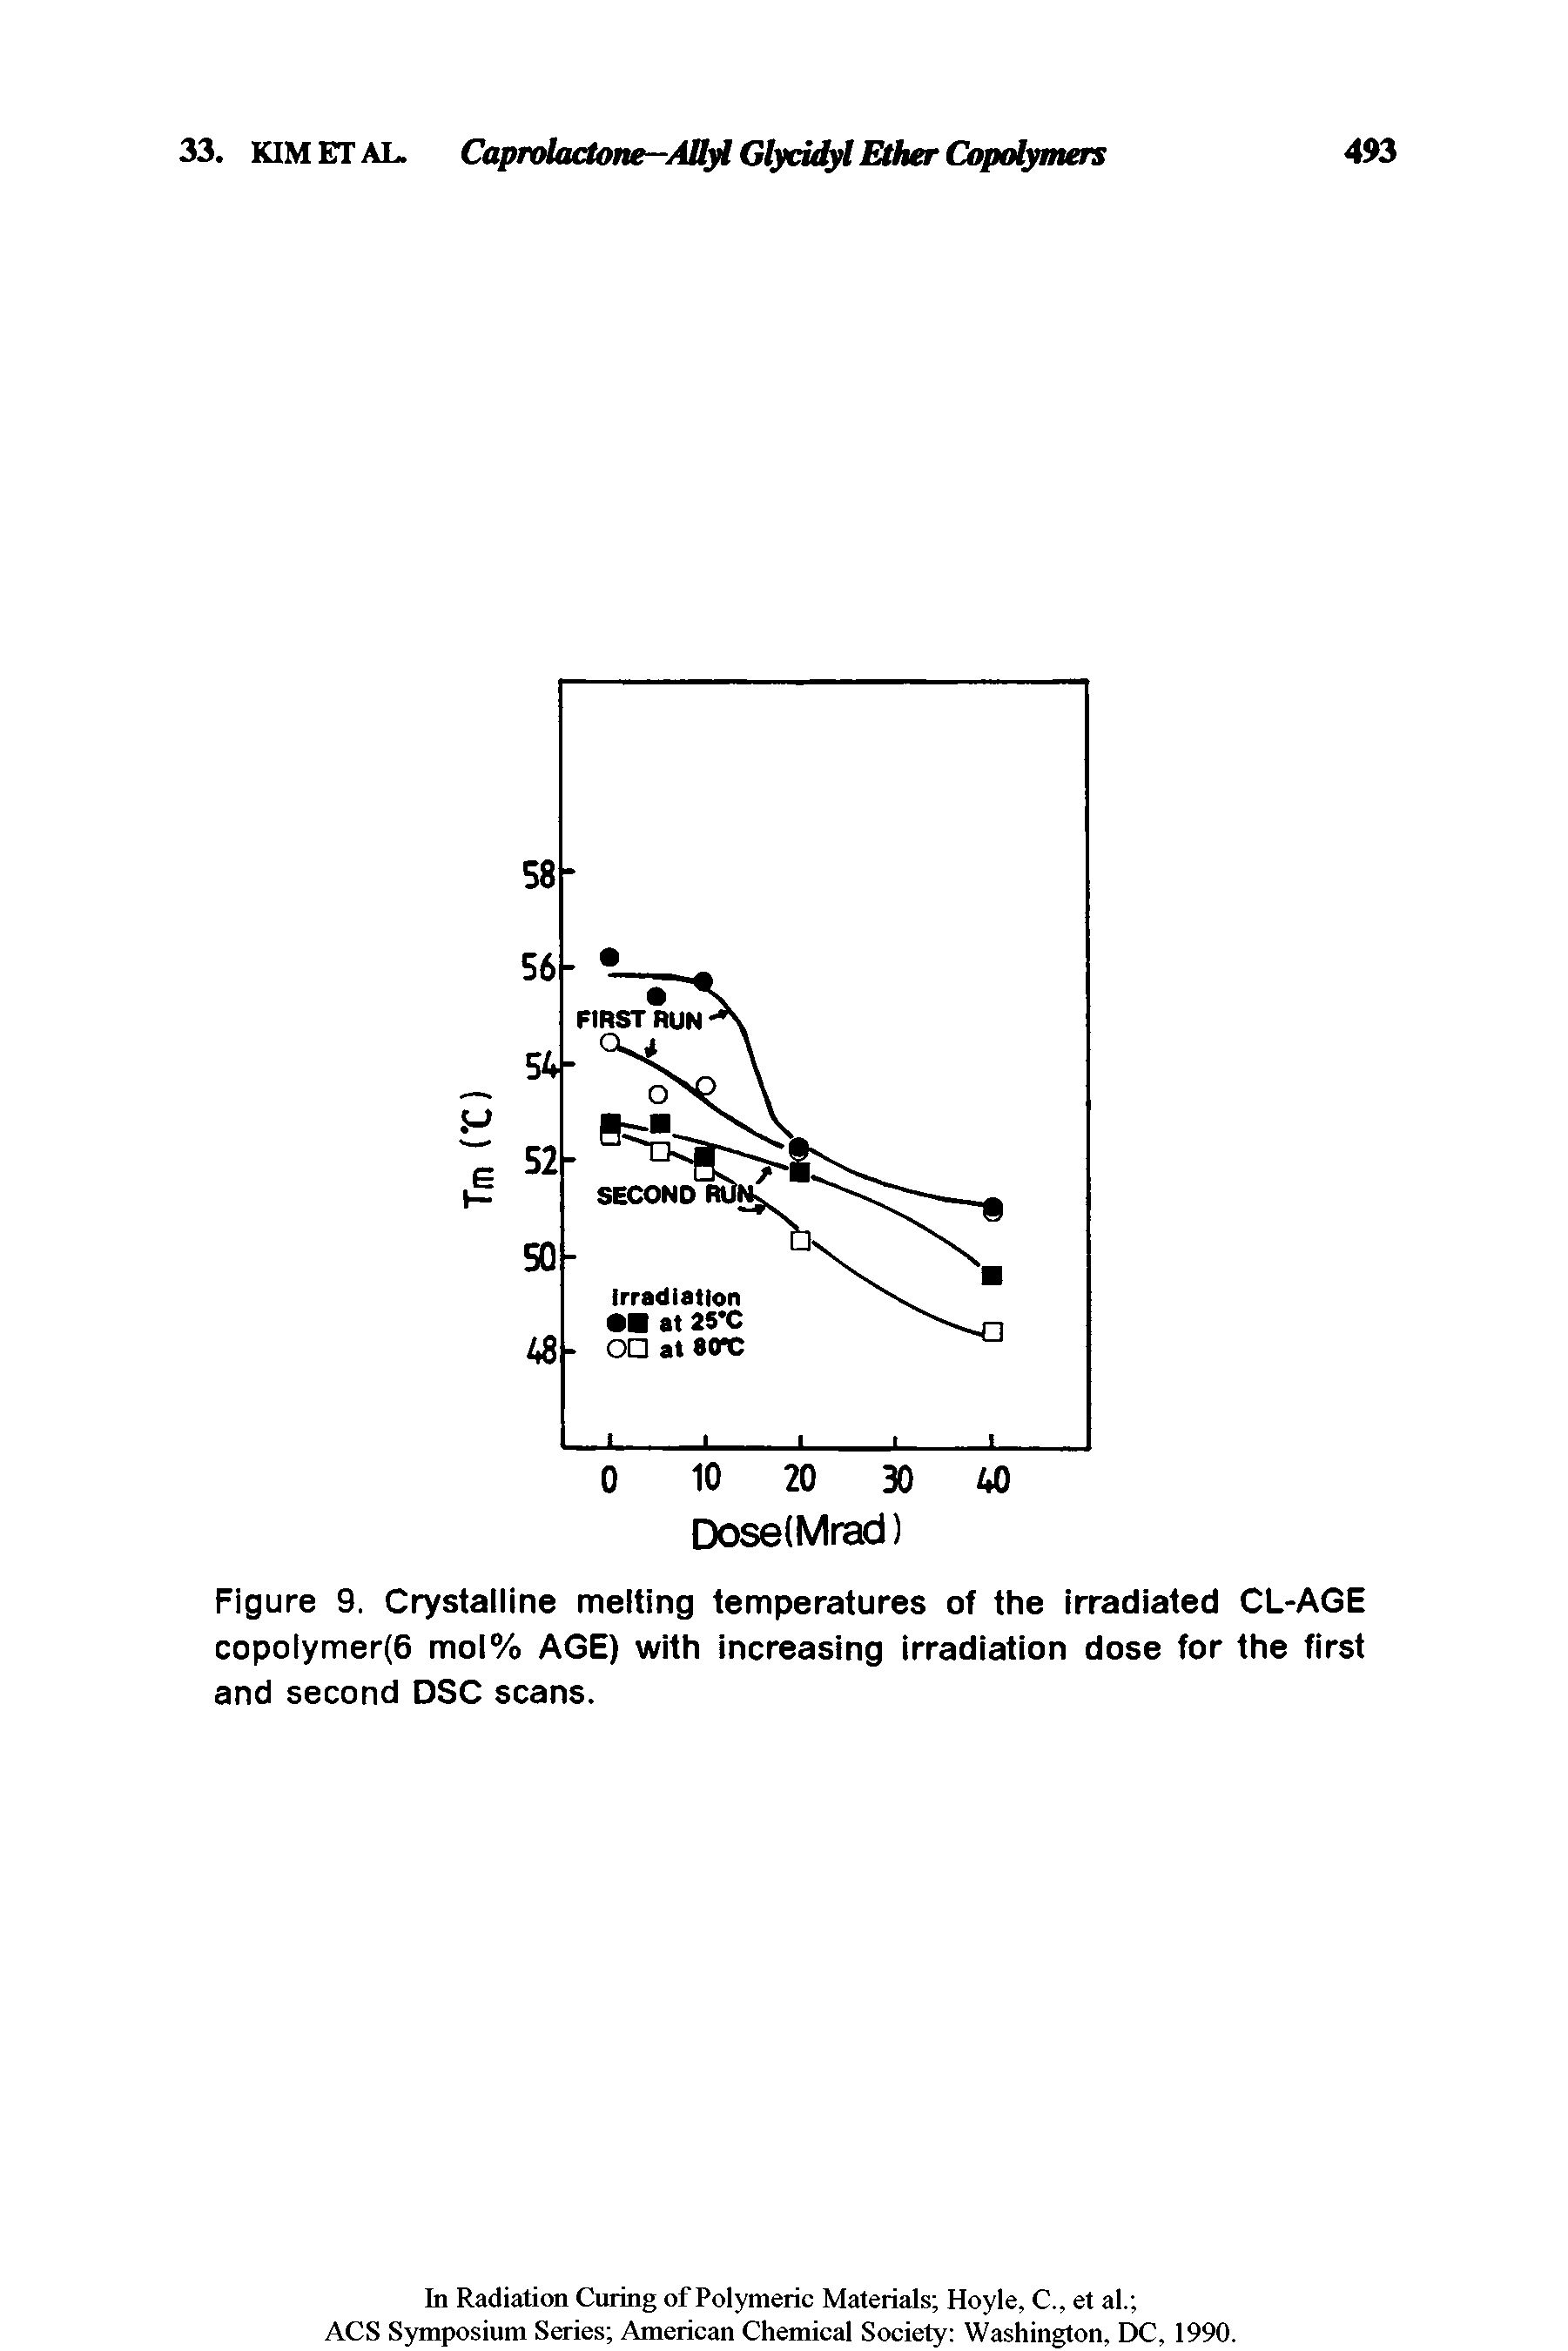 Figure 9. Crystalline melting temperatures of the irradiated CL-AGE copolymer(6 mol% AGE) with increasing irradiation dose for the first and second DSC scans.